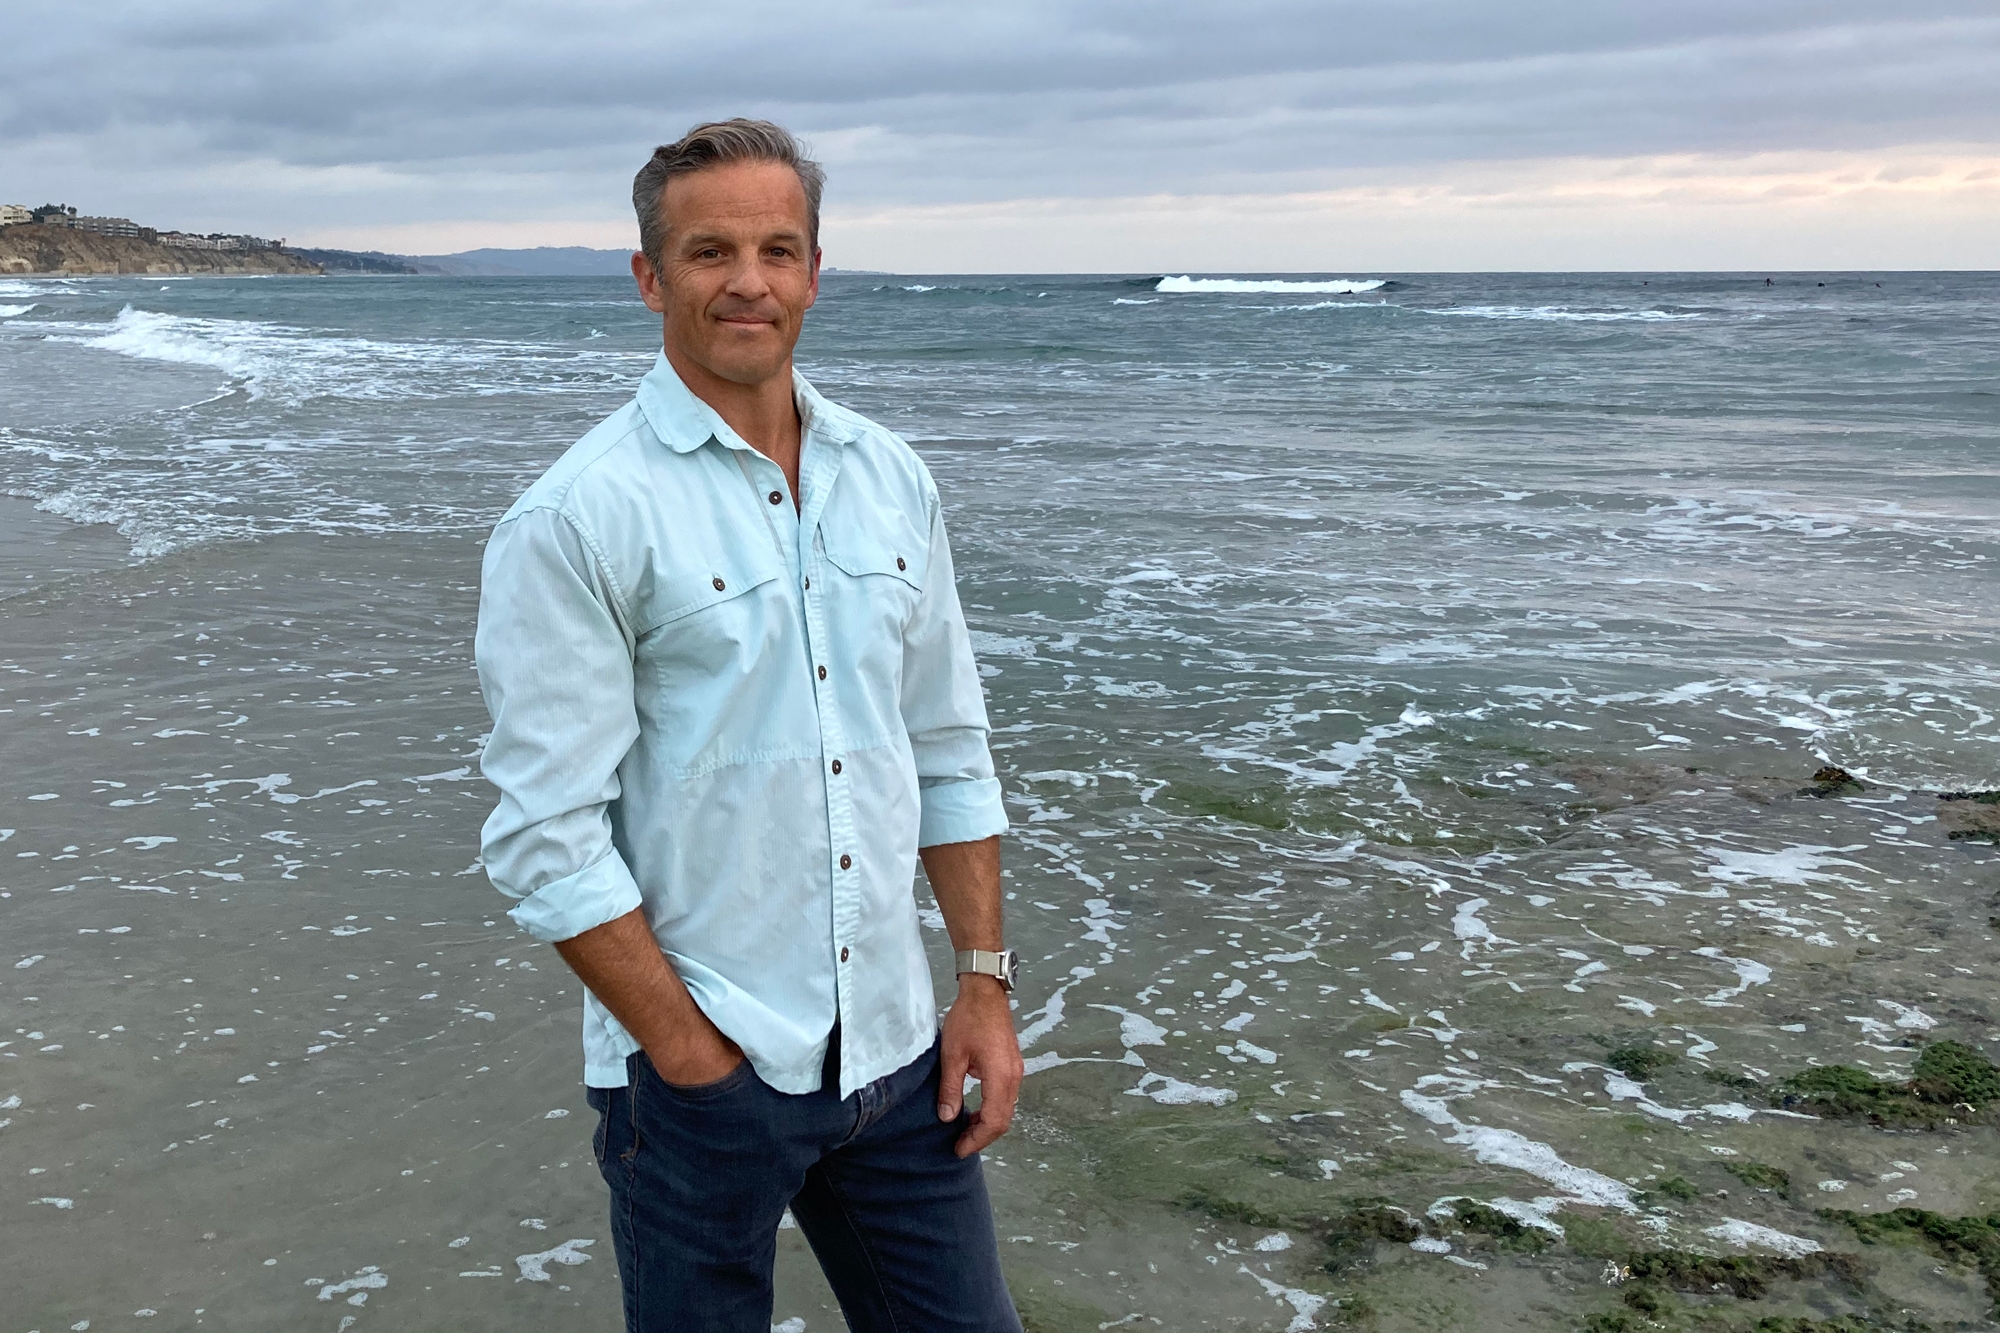 Author Dan Sheehan stands on an ocean beach wearing jeans and a button-down shirt.